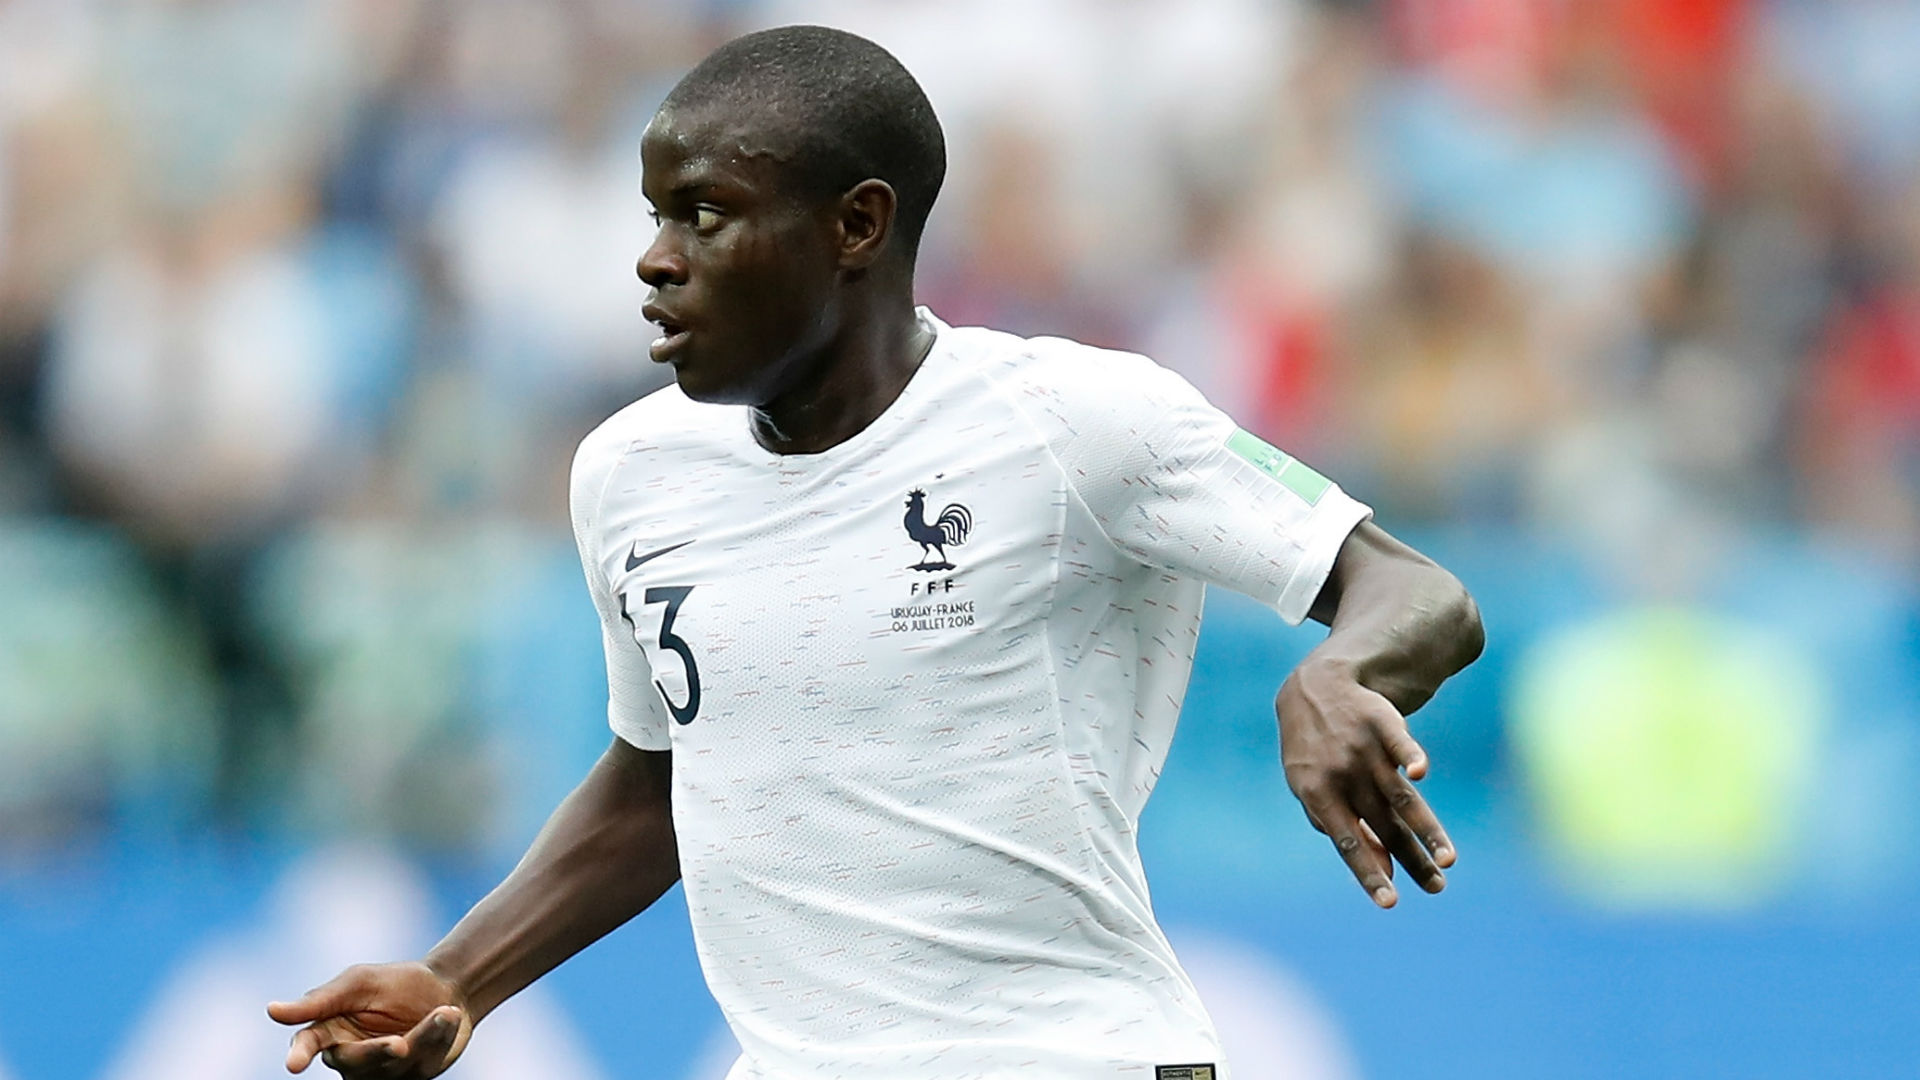 France boss Deschamps relaxed on Kante role at Chelsea